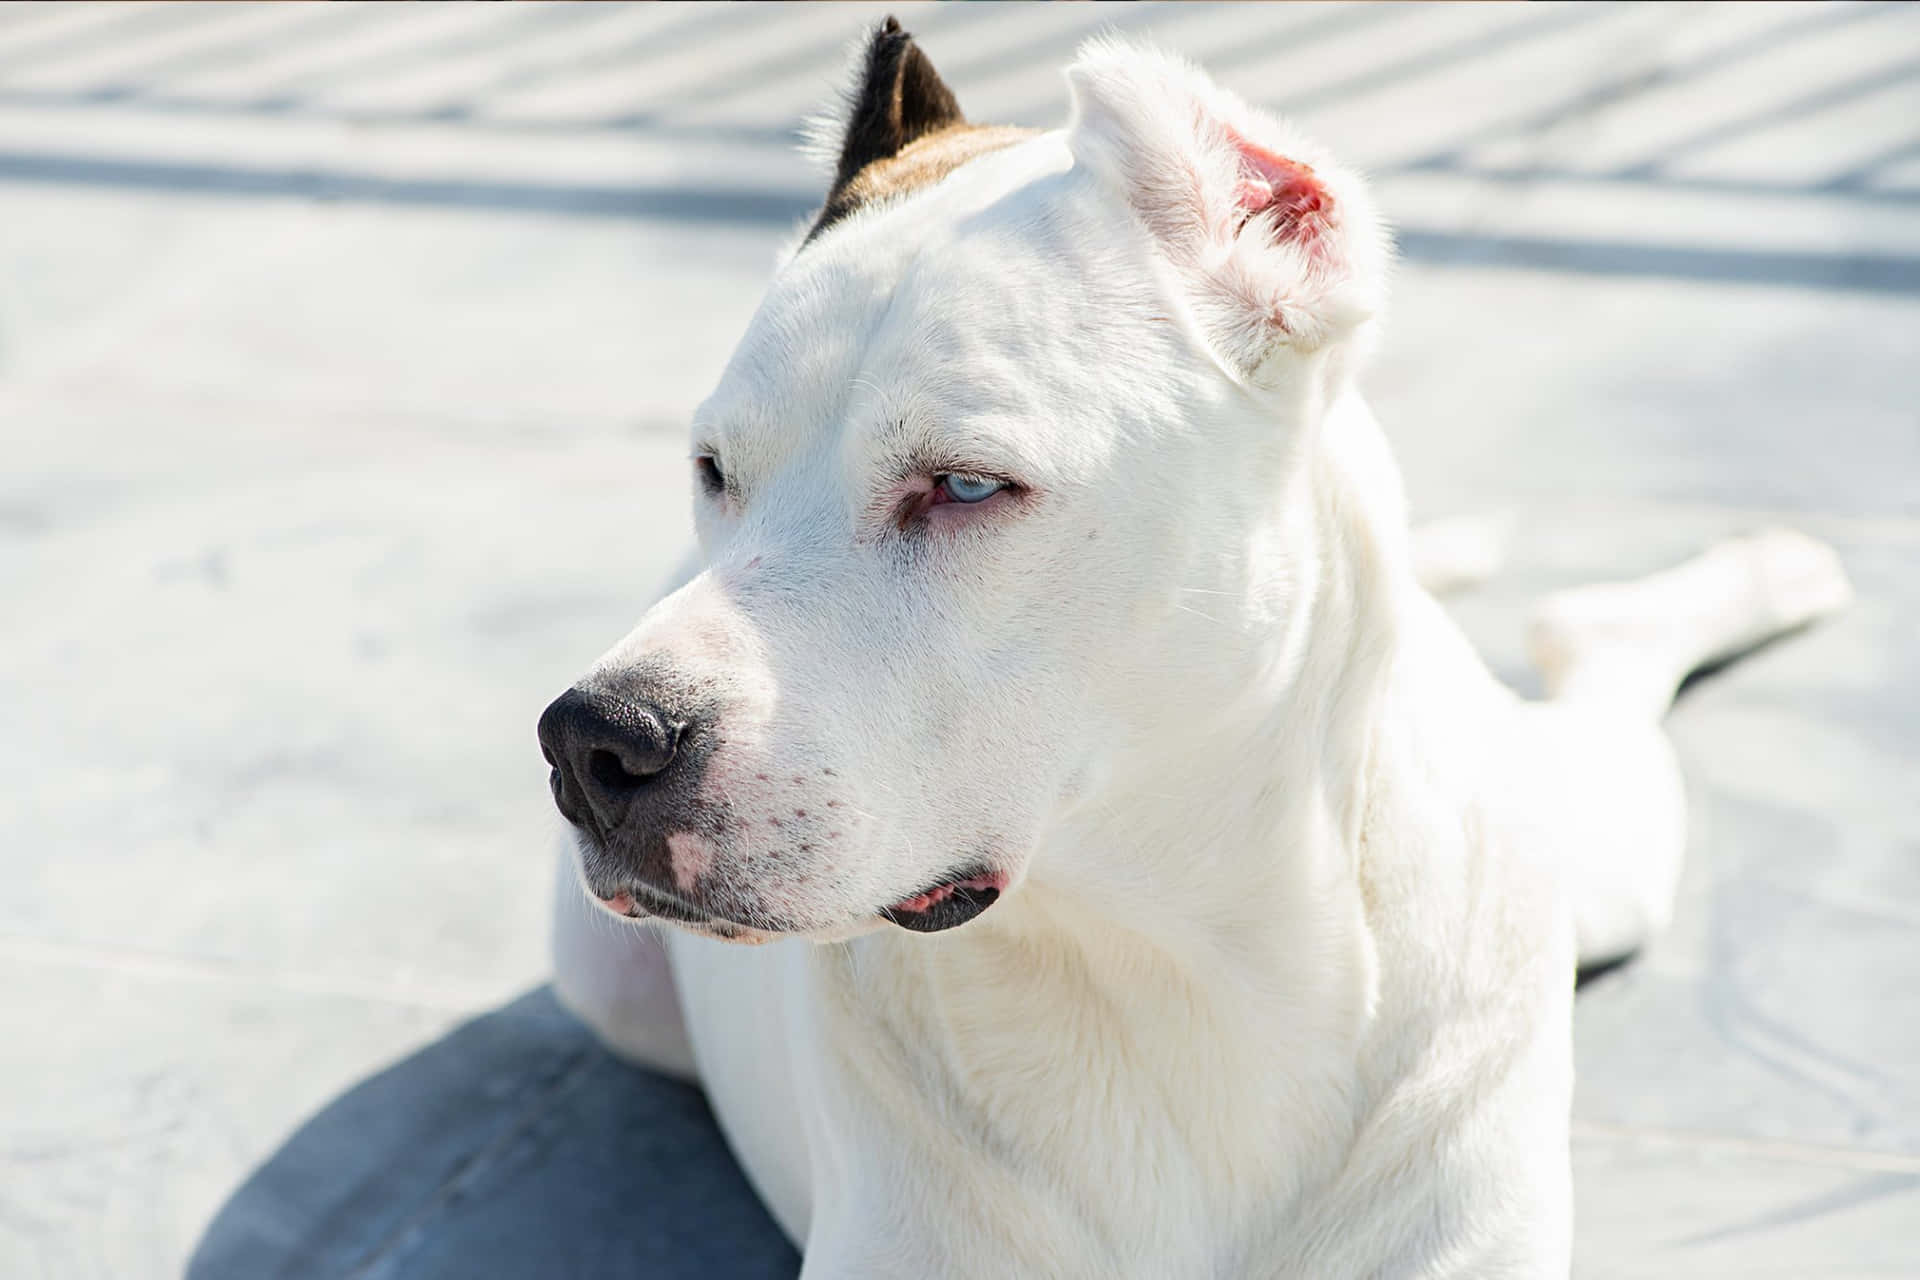 Perched atop a hill, a stunning Dogo Argentino stands alert